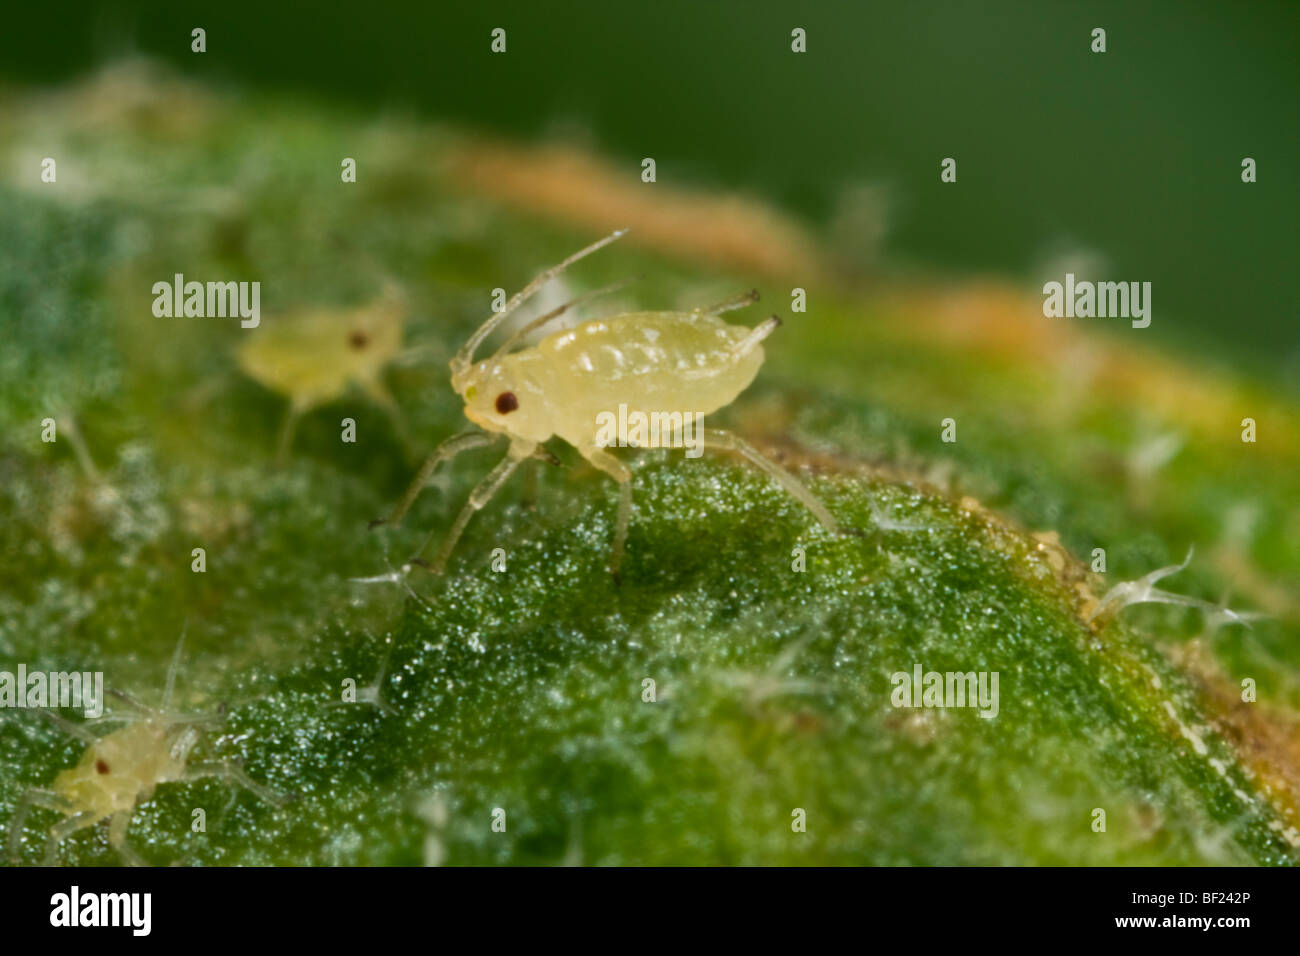 Agriculture - Green peach aphid nymphs (Myzus persicae) on a leaf, side view / California, USA. Stock Photo